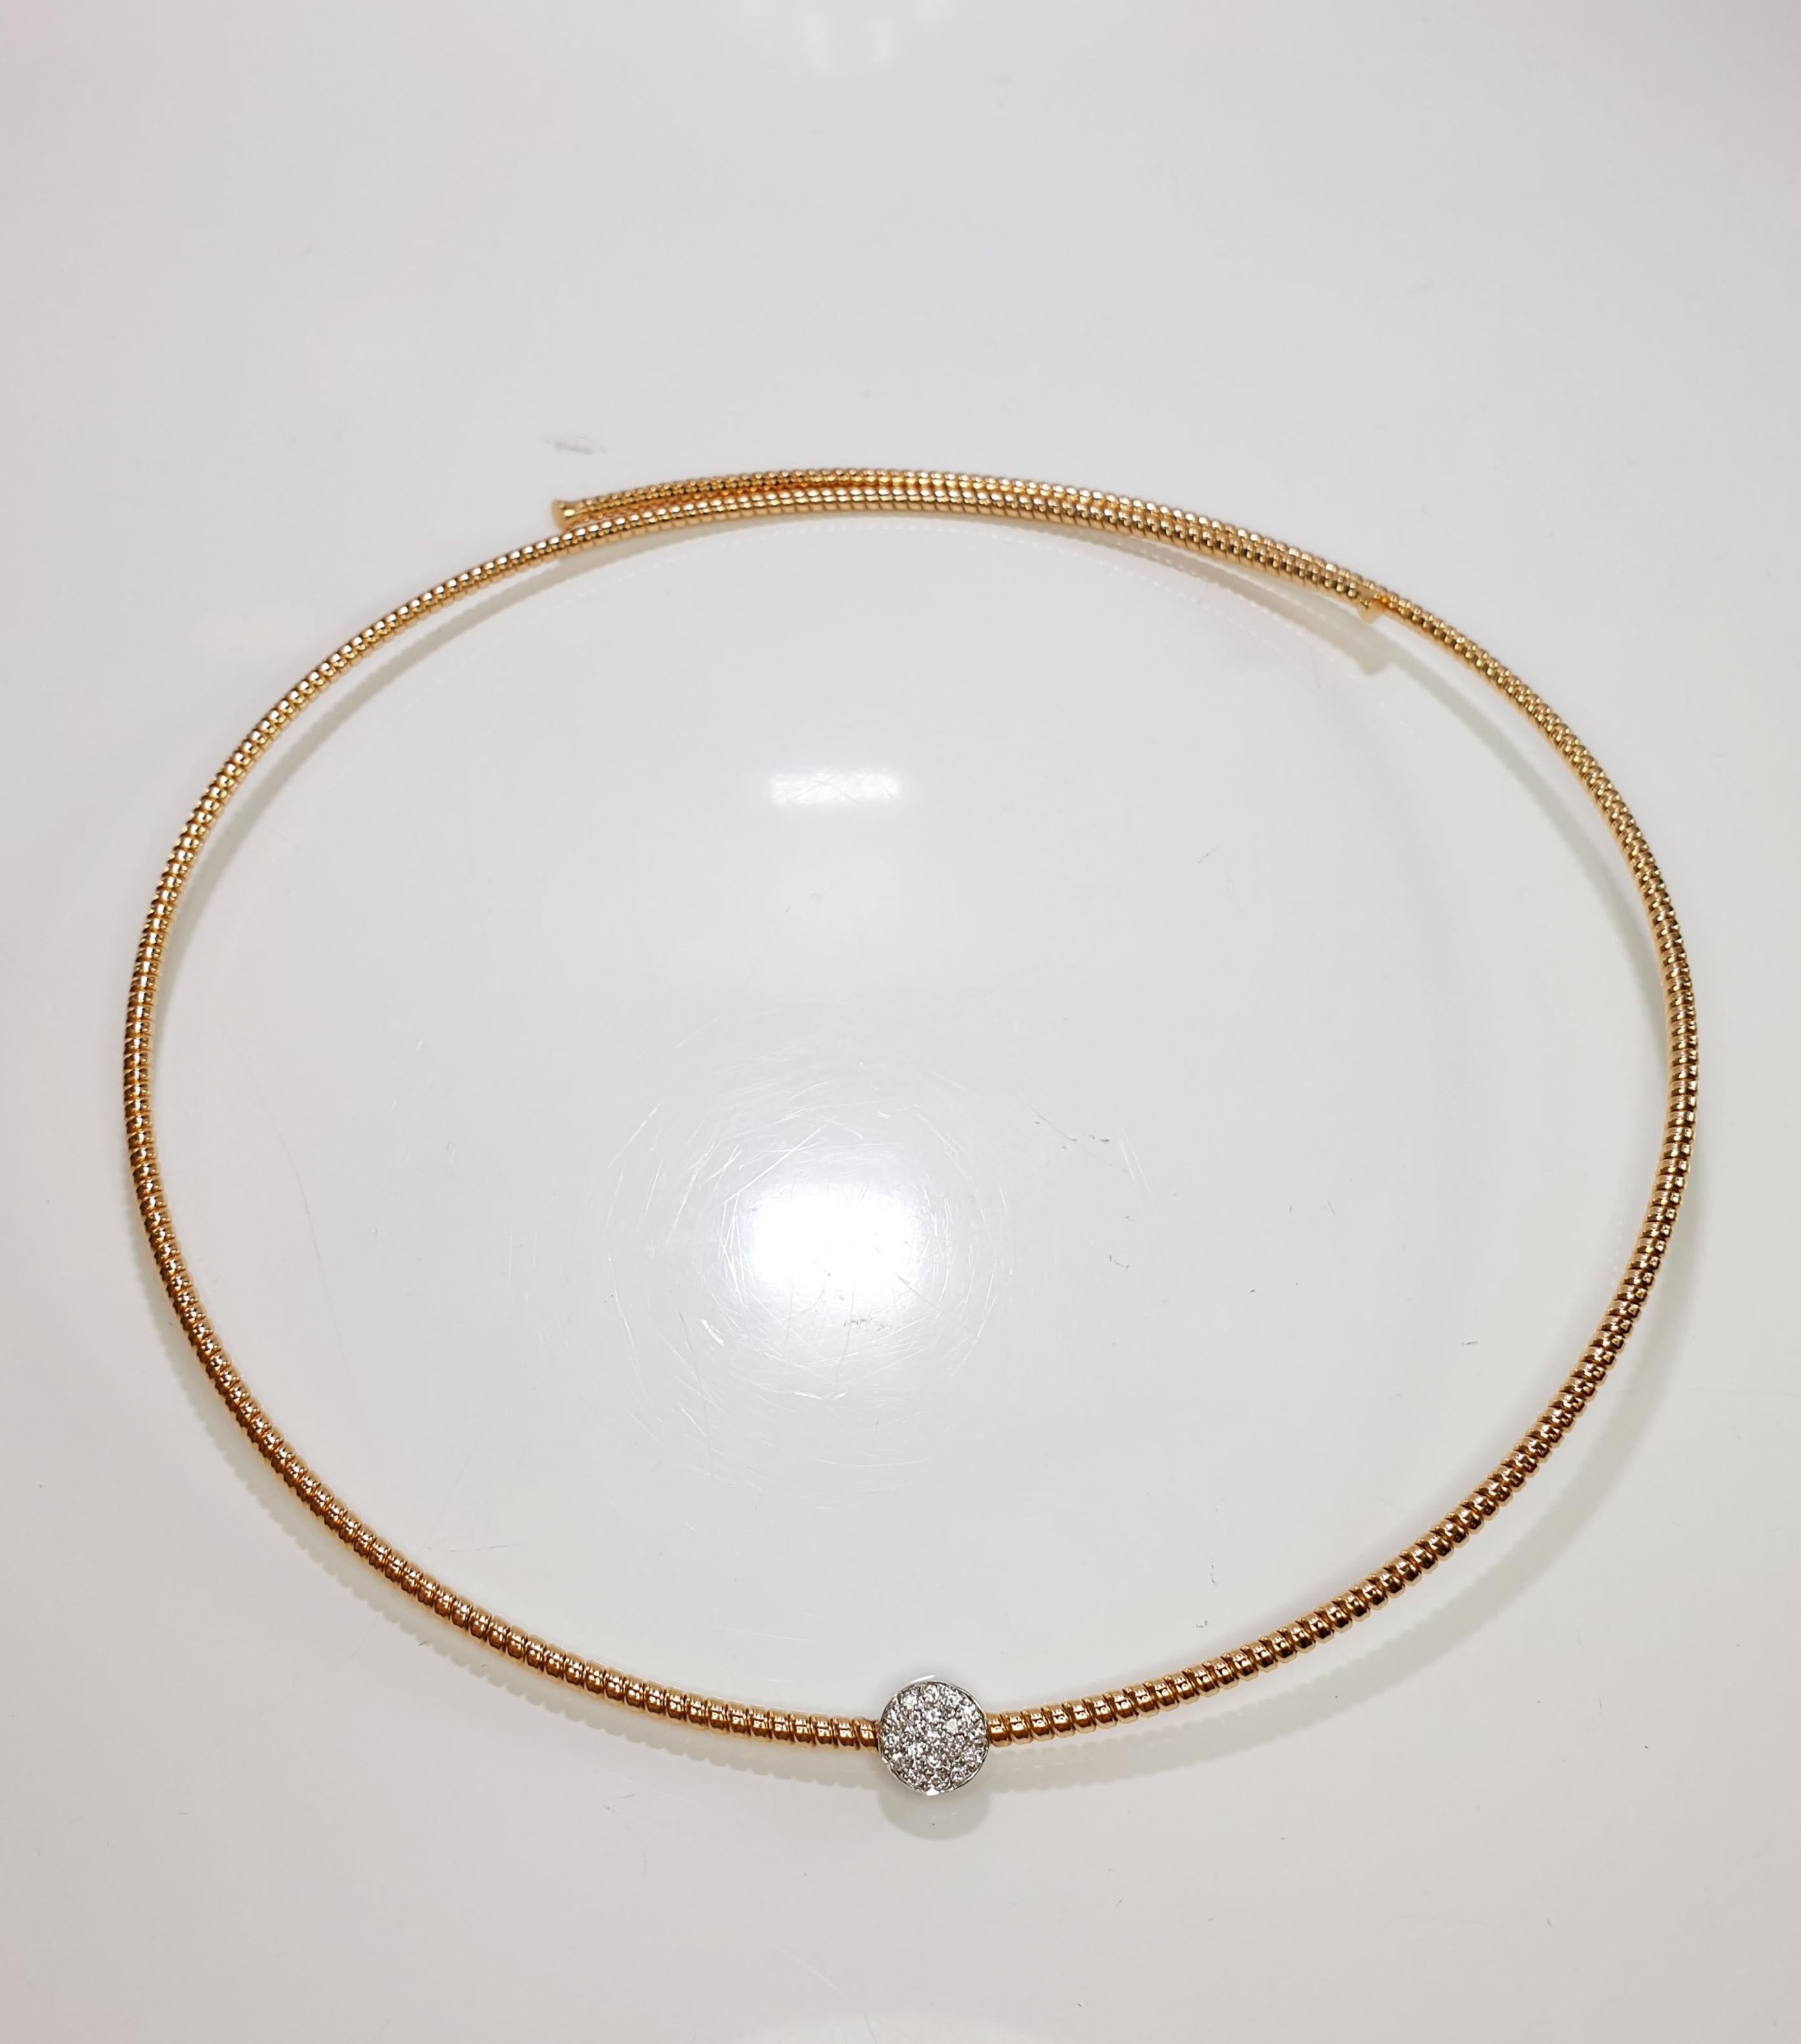 Flexible and adaptable necklace with tubogas craftmanship that fits medium to large sizes.
Available in three colours of gold, yellow, white and rose.
11,40gr and 0.25Carat Diamonds
Request availability if in stock 5 days handling time
If not in